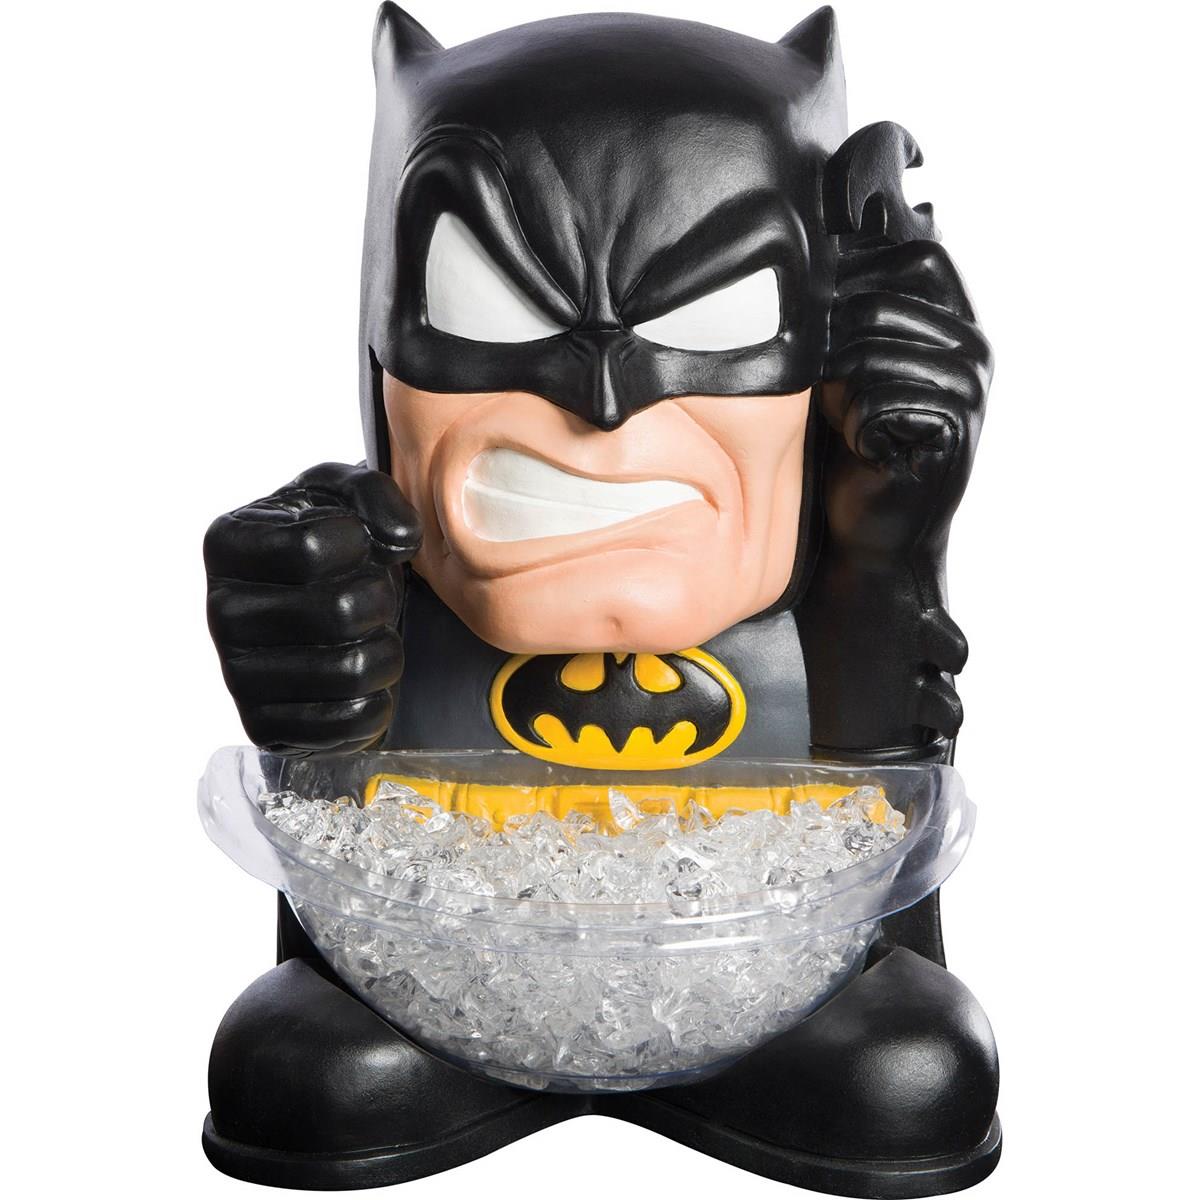 Rubies 279246 Halloween 14.5 In. Batman Candy Bowl - Nominal Size